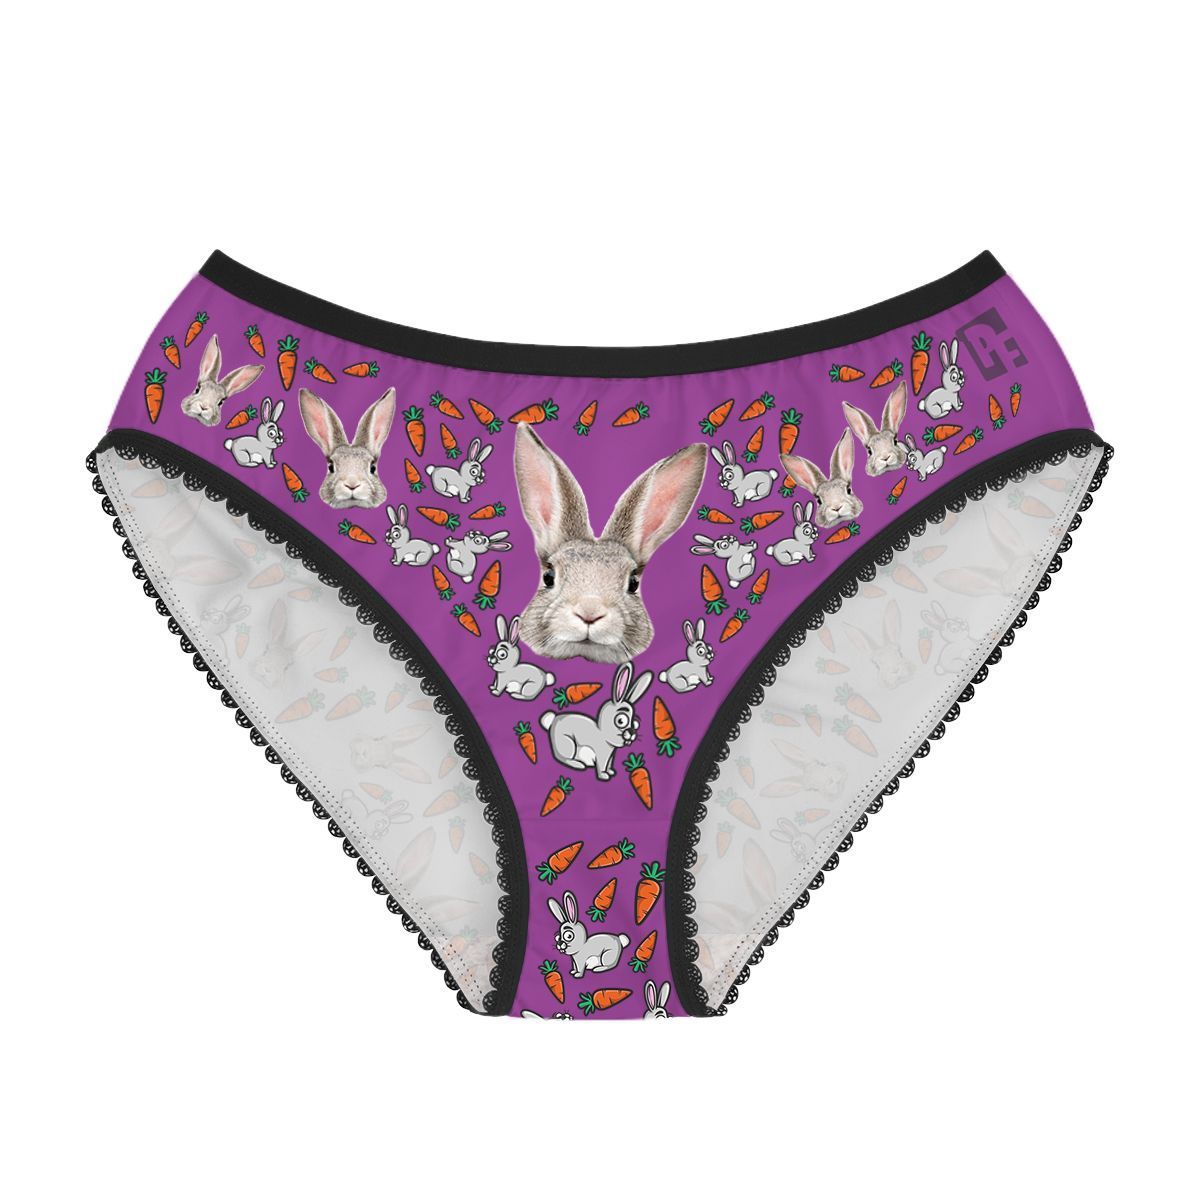 Purple Bunny women's underwear briefs personalized with photo printed on them